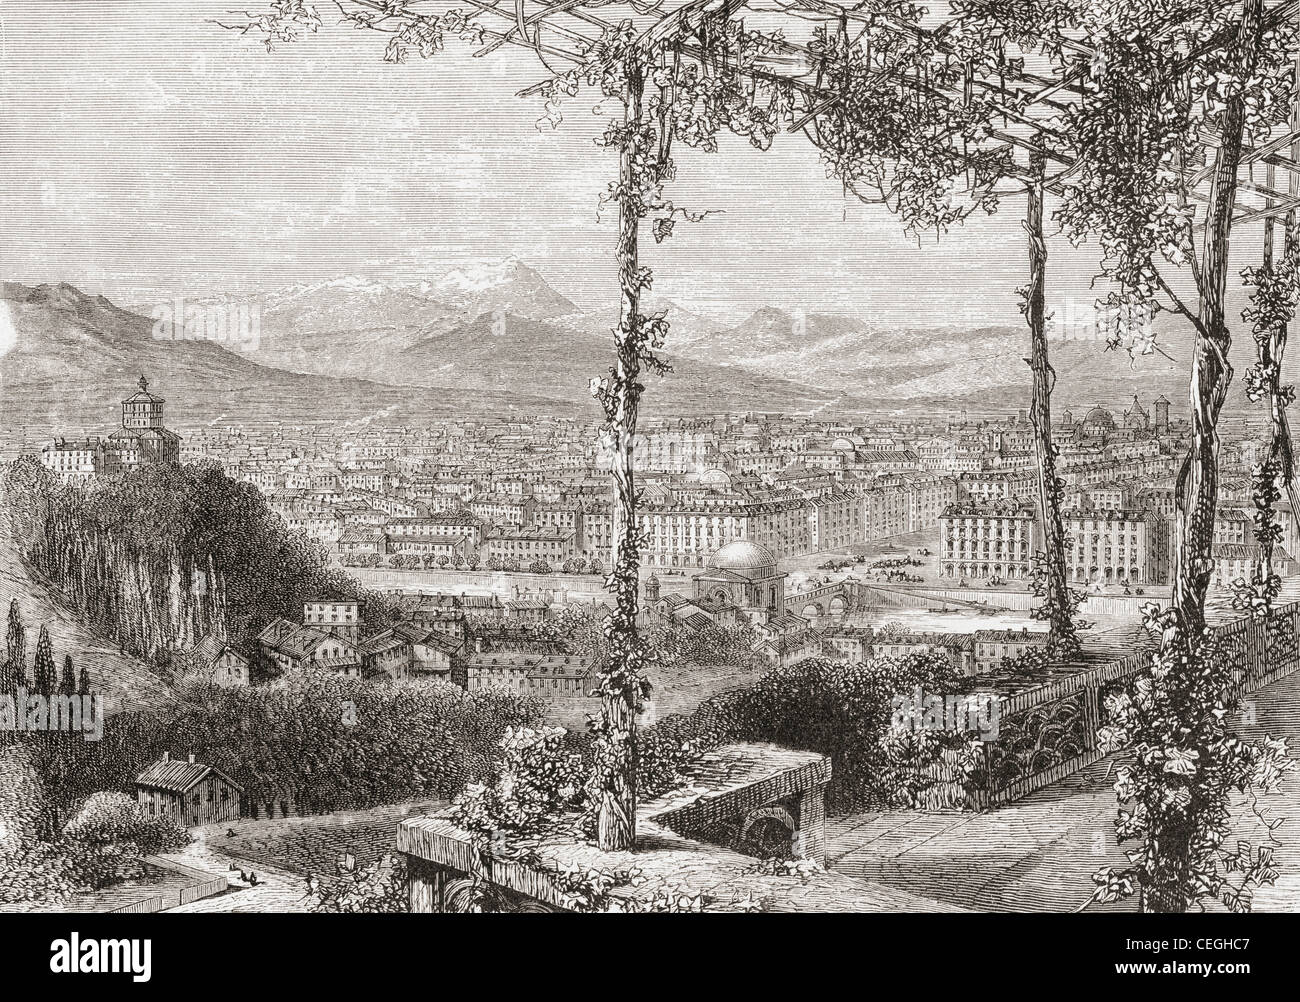 Turin, Italy in the late 19th century. From Italian Pictures by Rev. Samuel Manning, published c.1890. Stock Photo